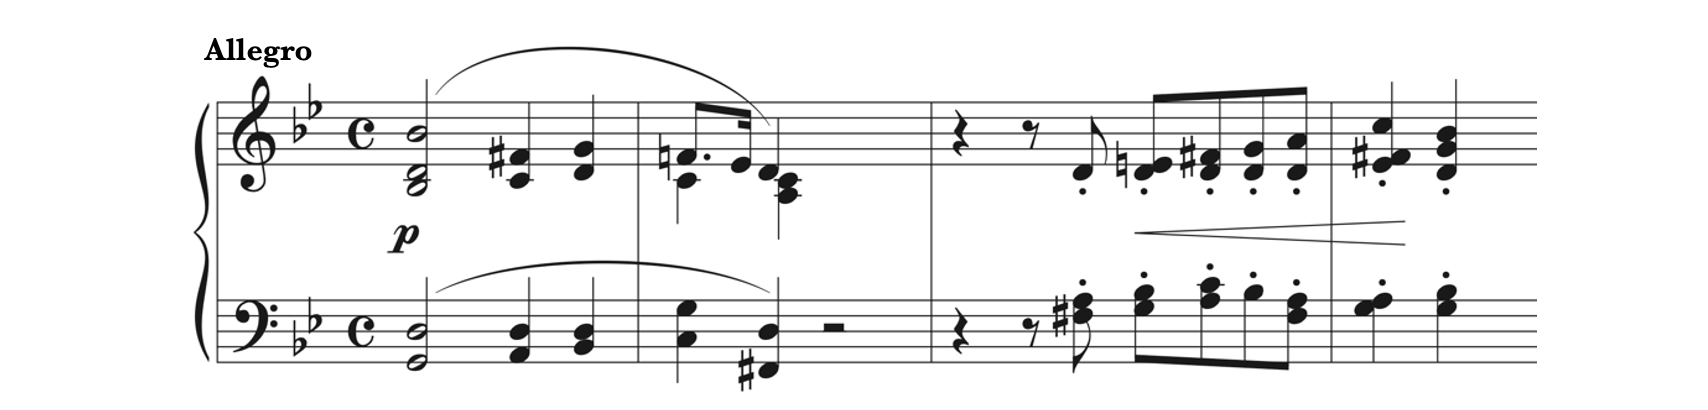 The opening four measures from Veek Schumann's Piano Sonata in G Minor, first movement - Allegro